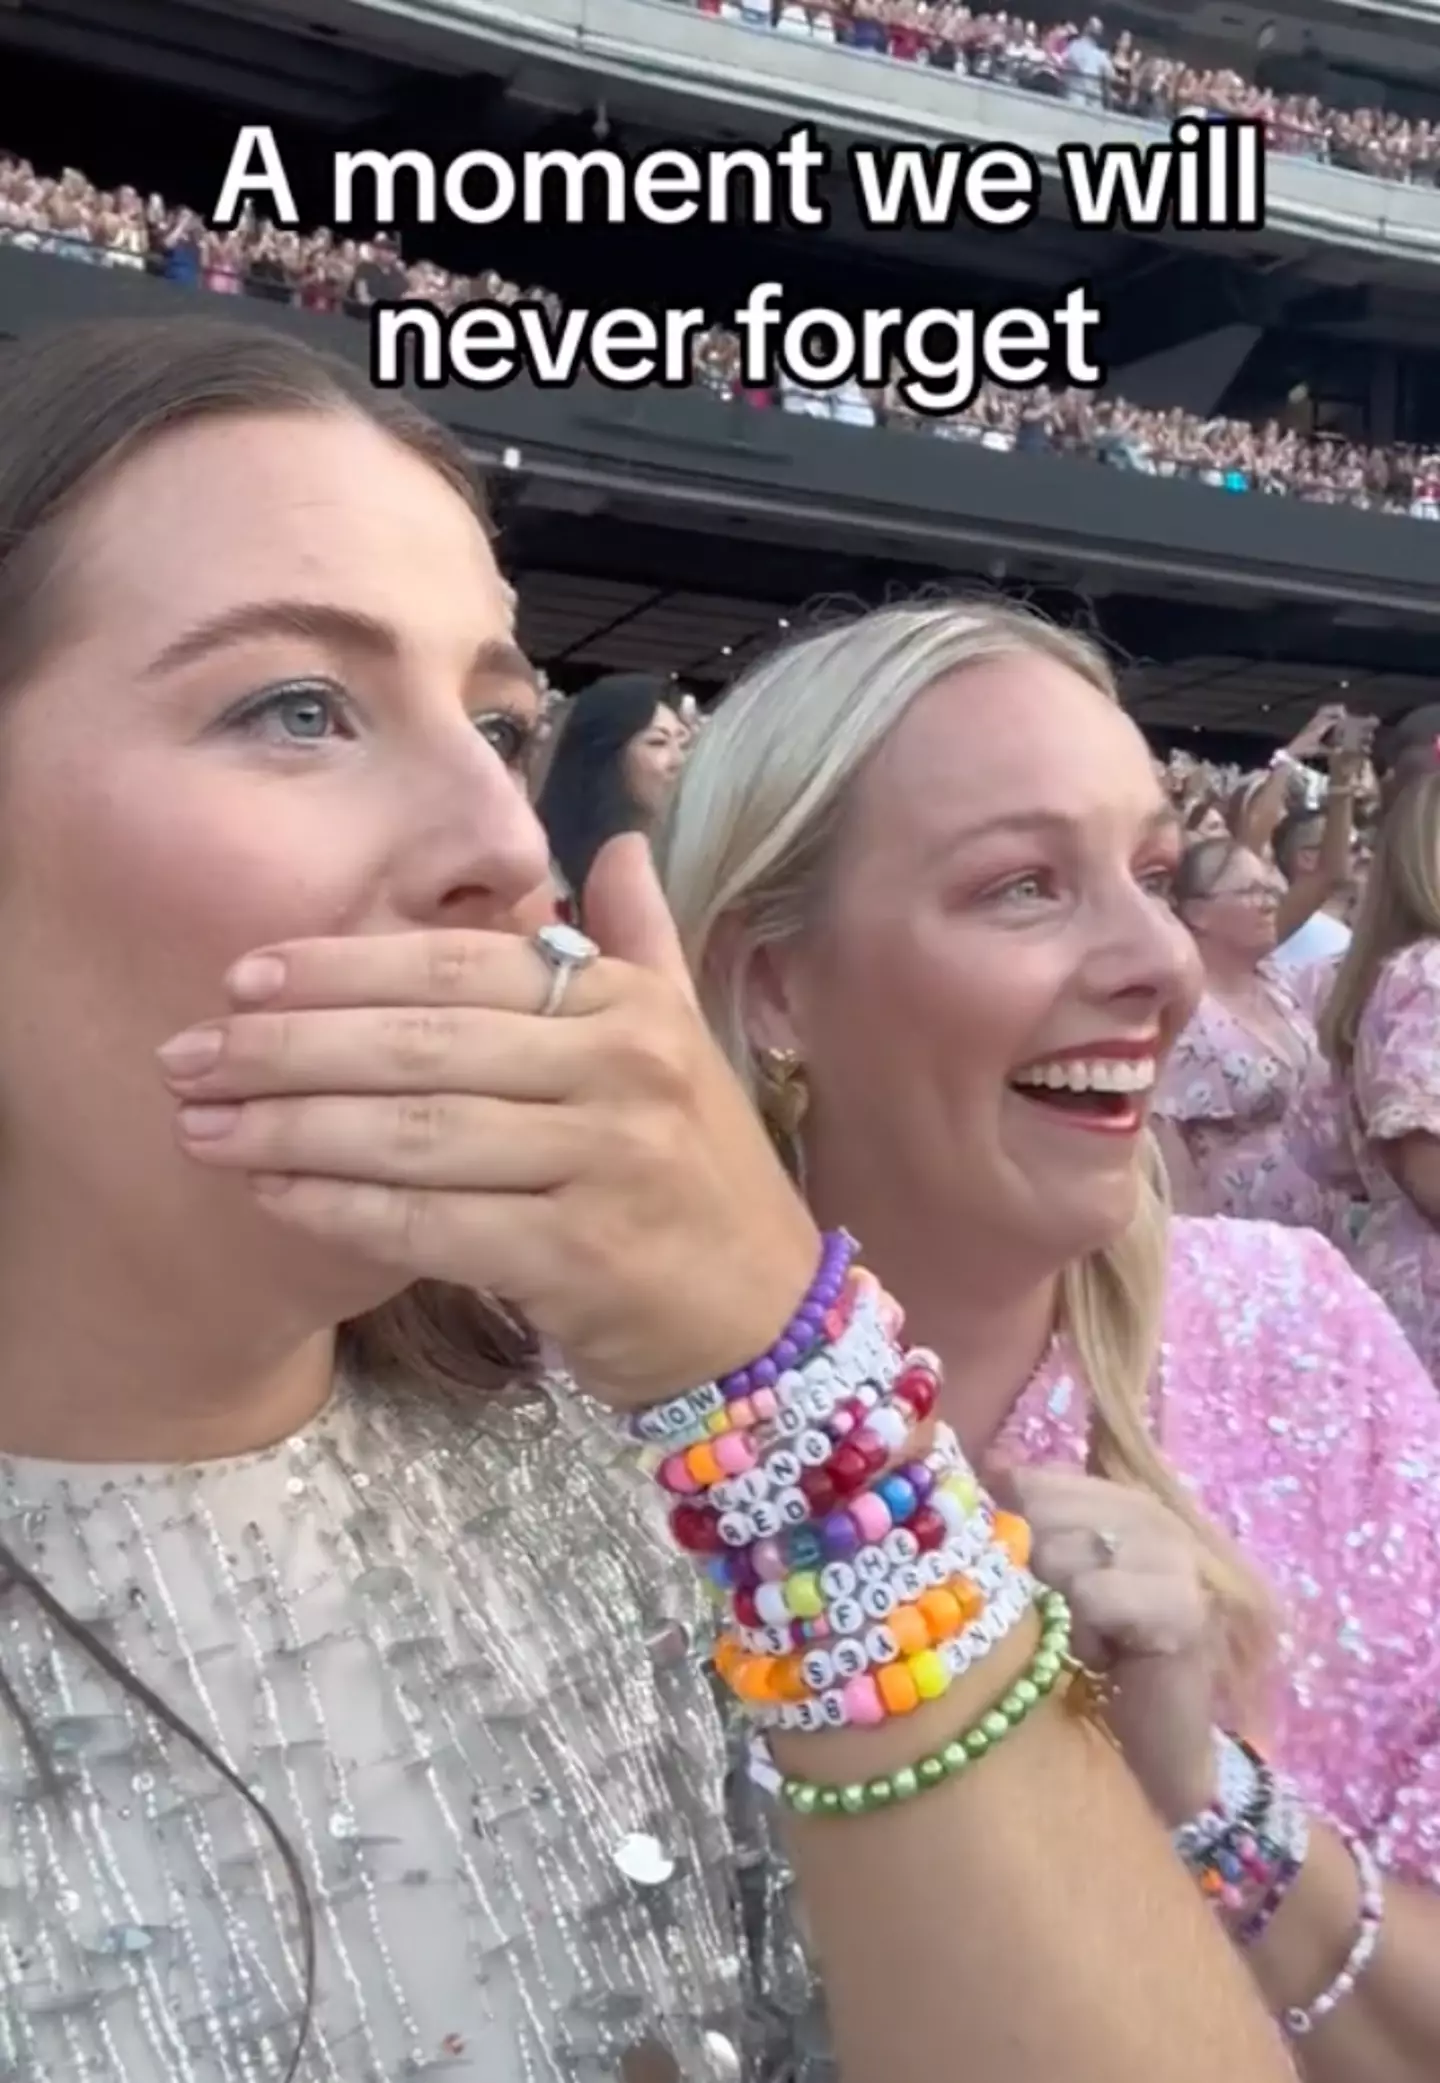 The TikTok also shared another video, likely after she and her friend had been moved from their obstructed seats.